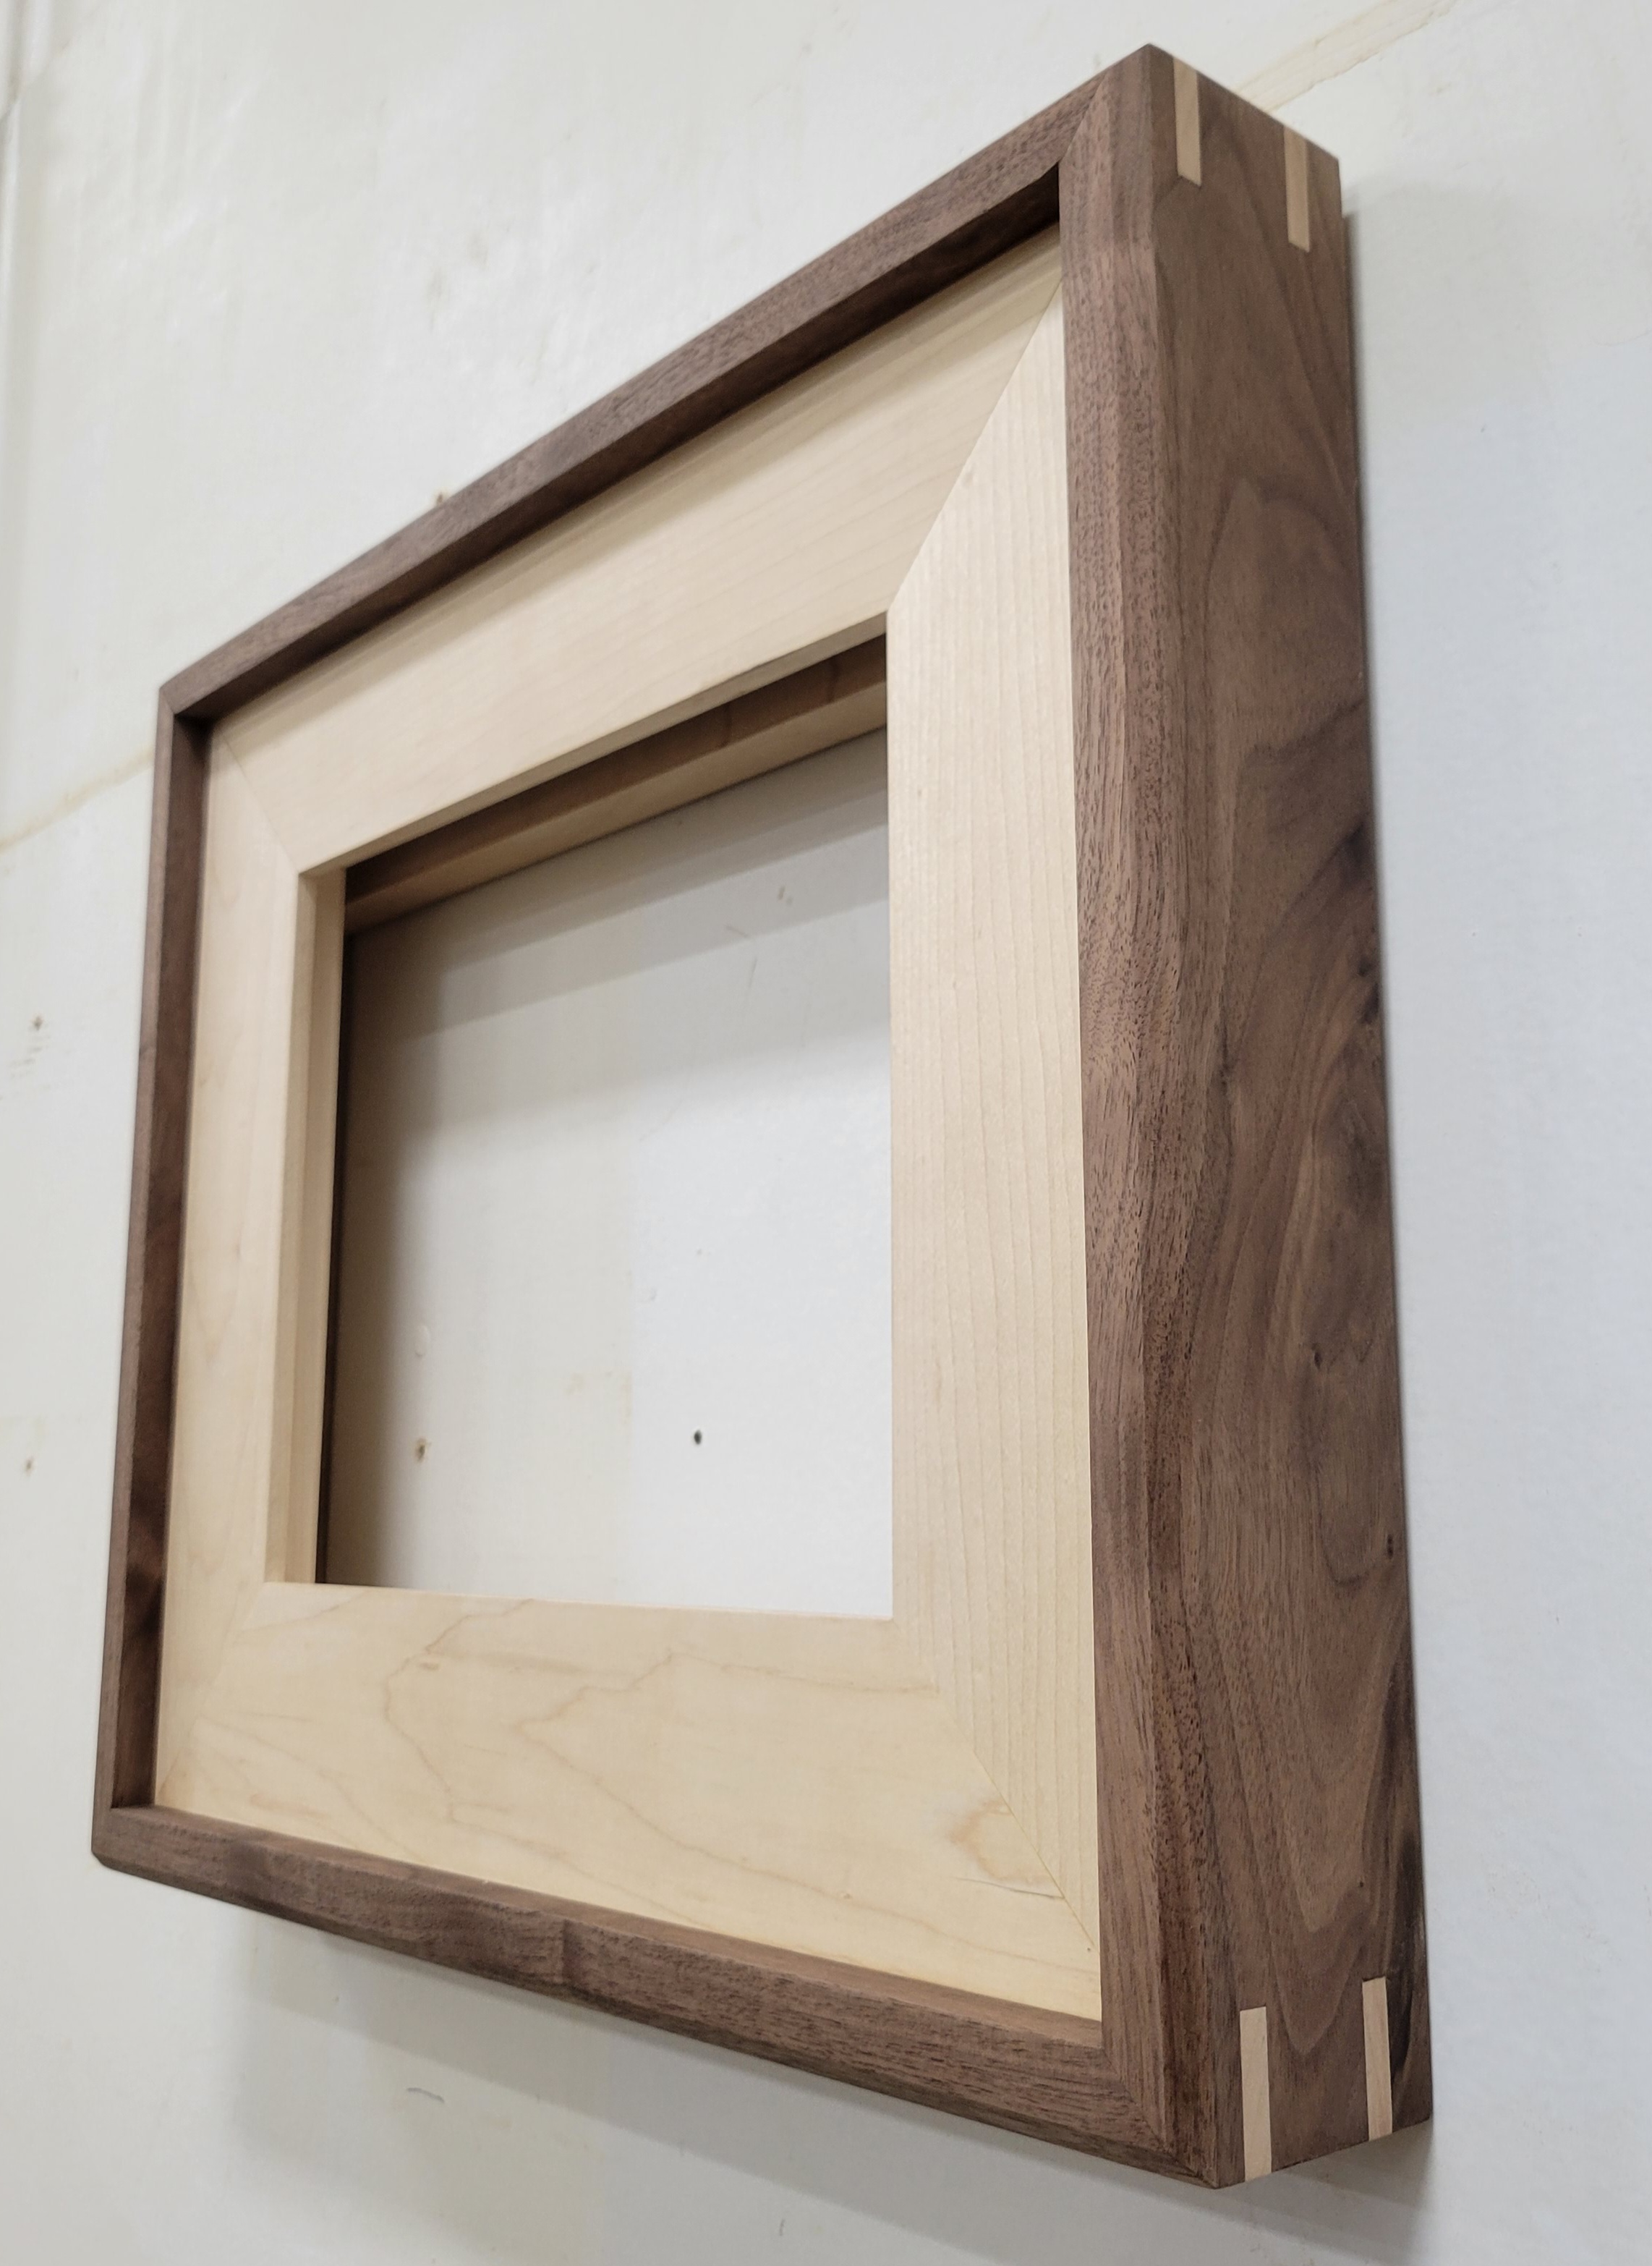 A picture frame box made of wood